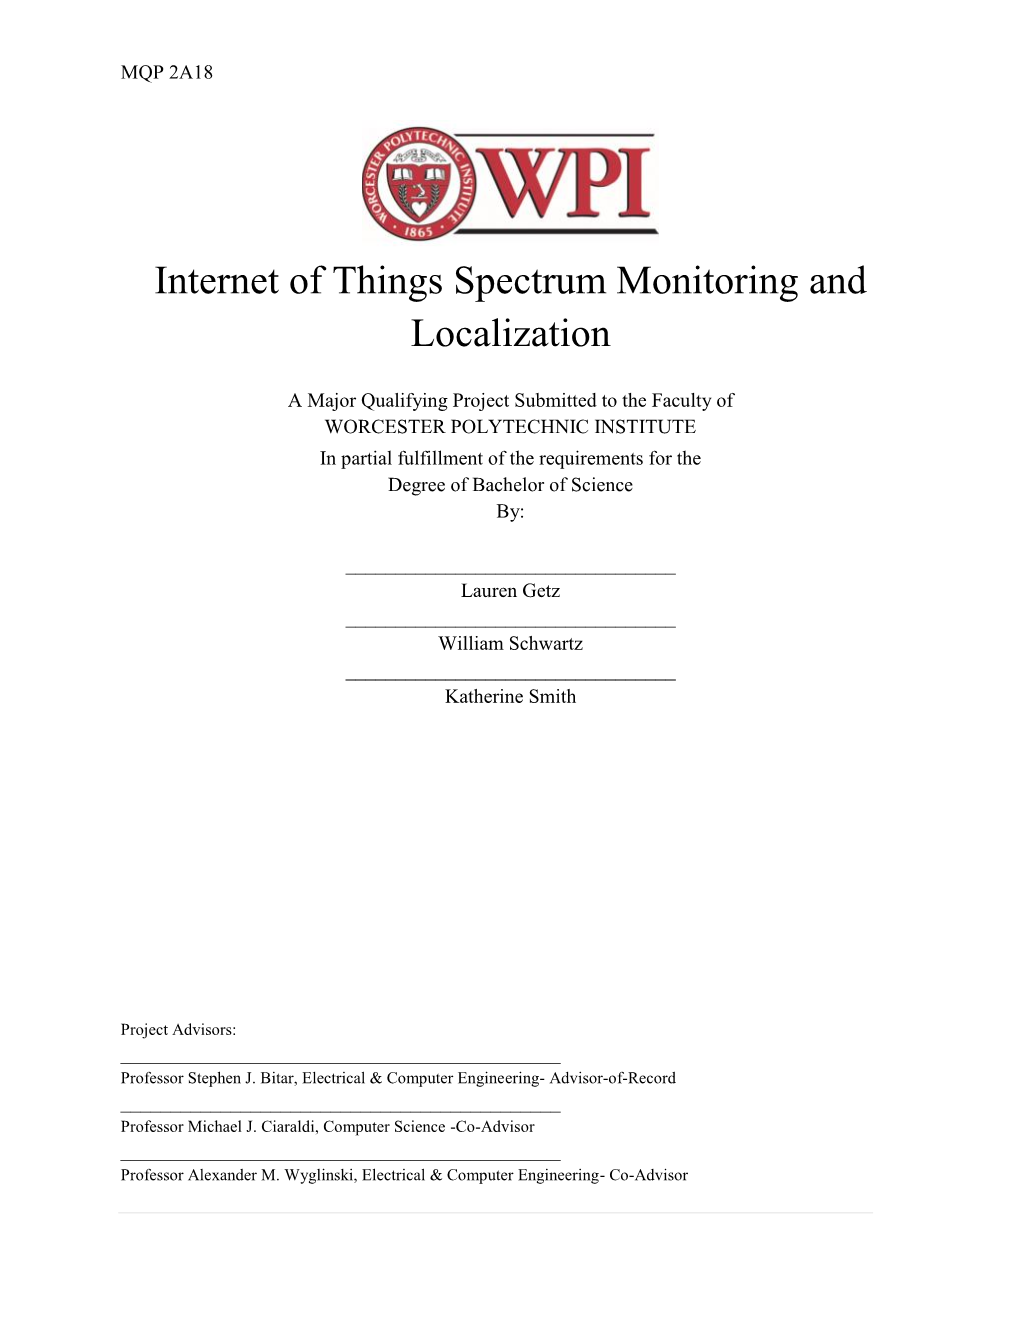 Internet of Things Spectrum Monitoring and Localization